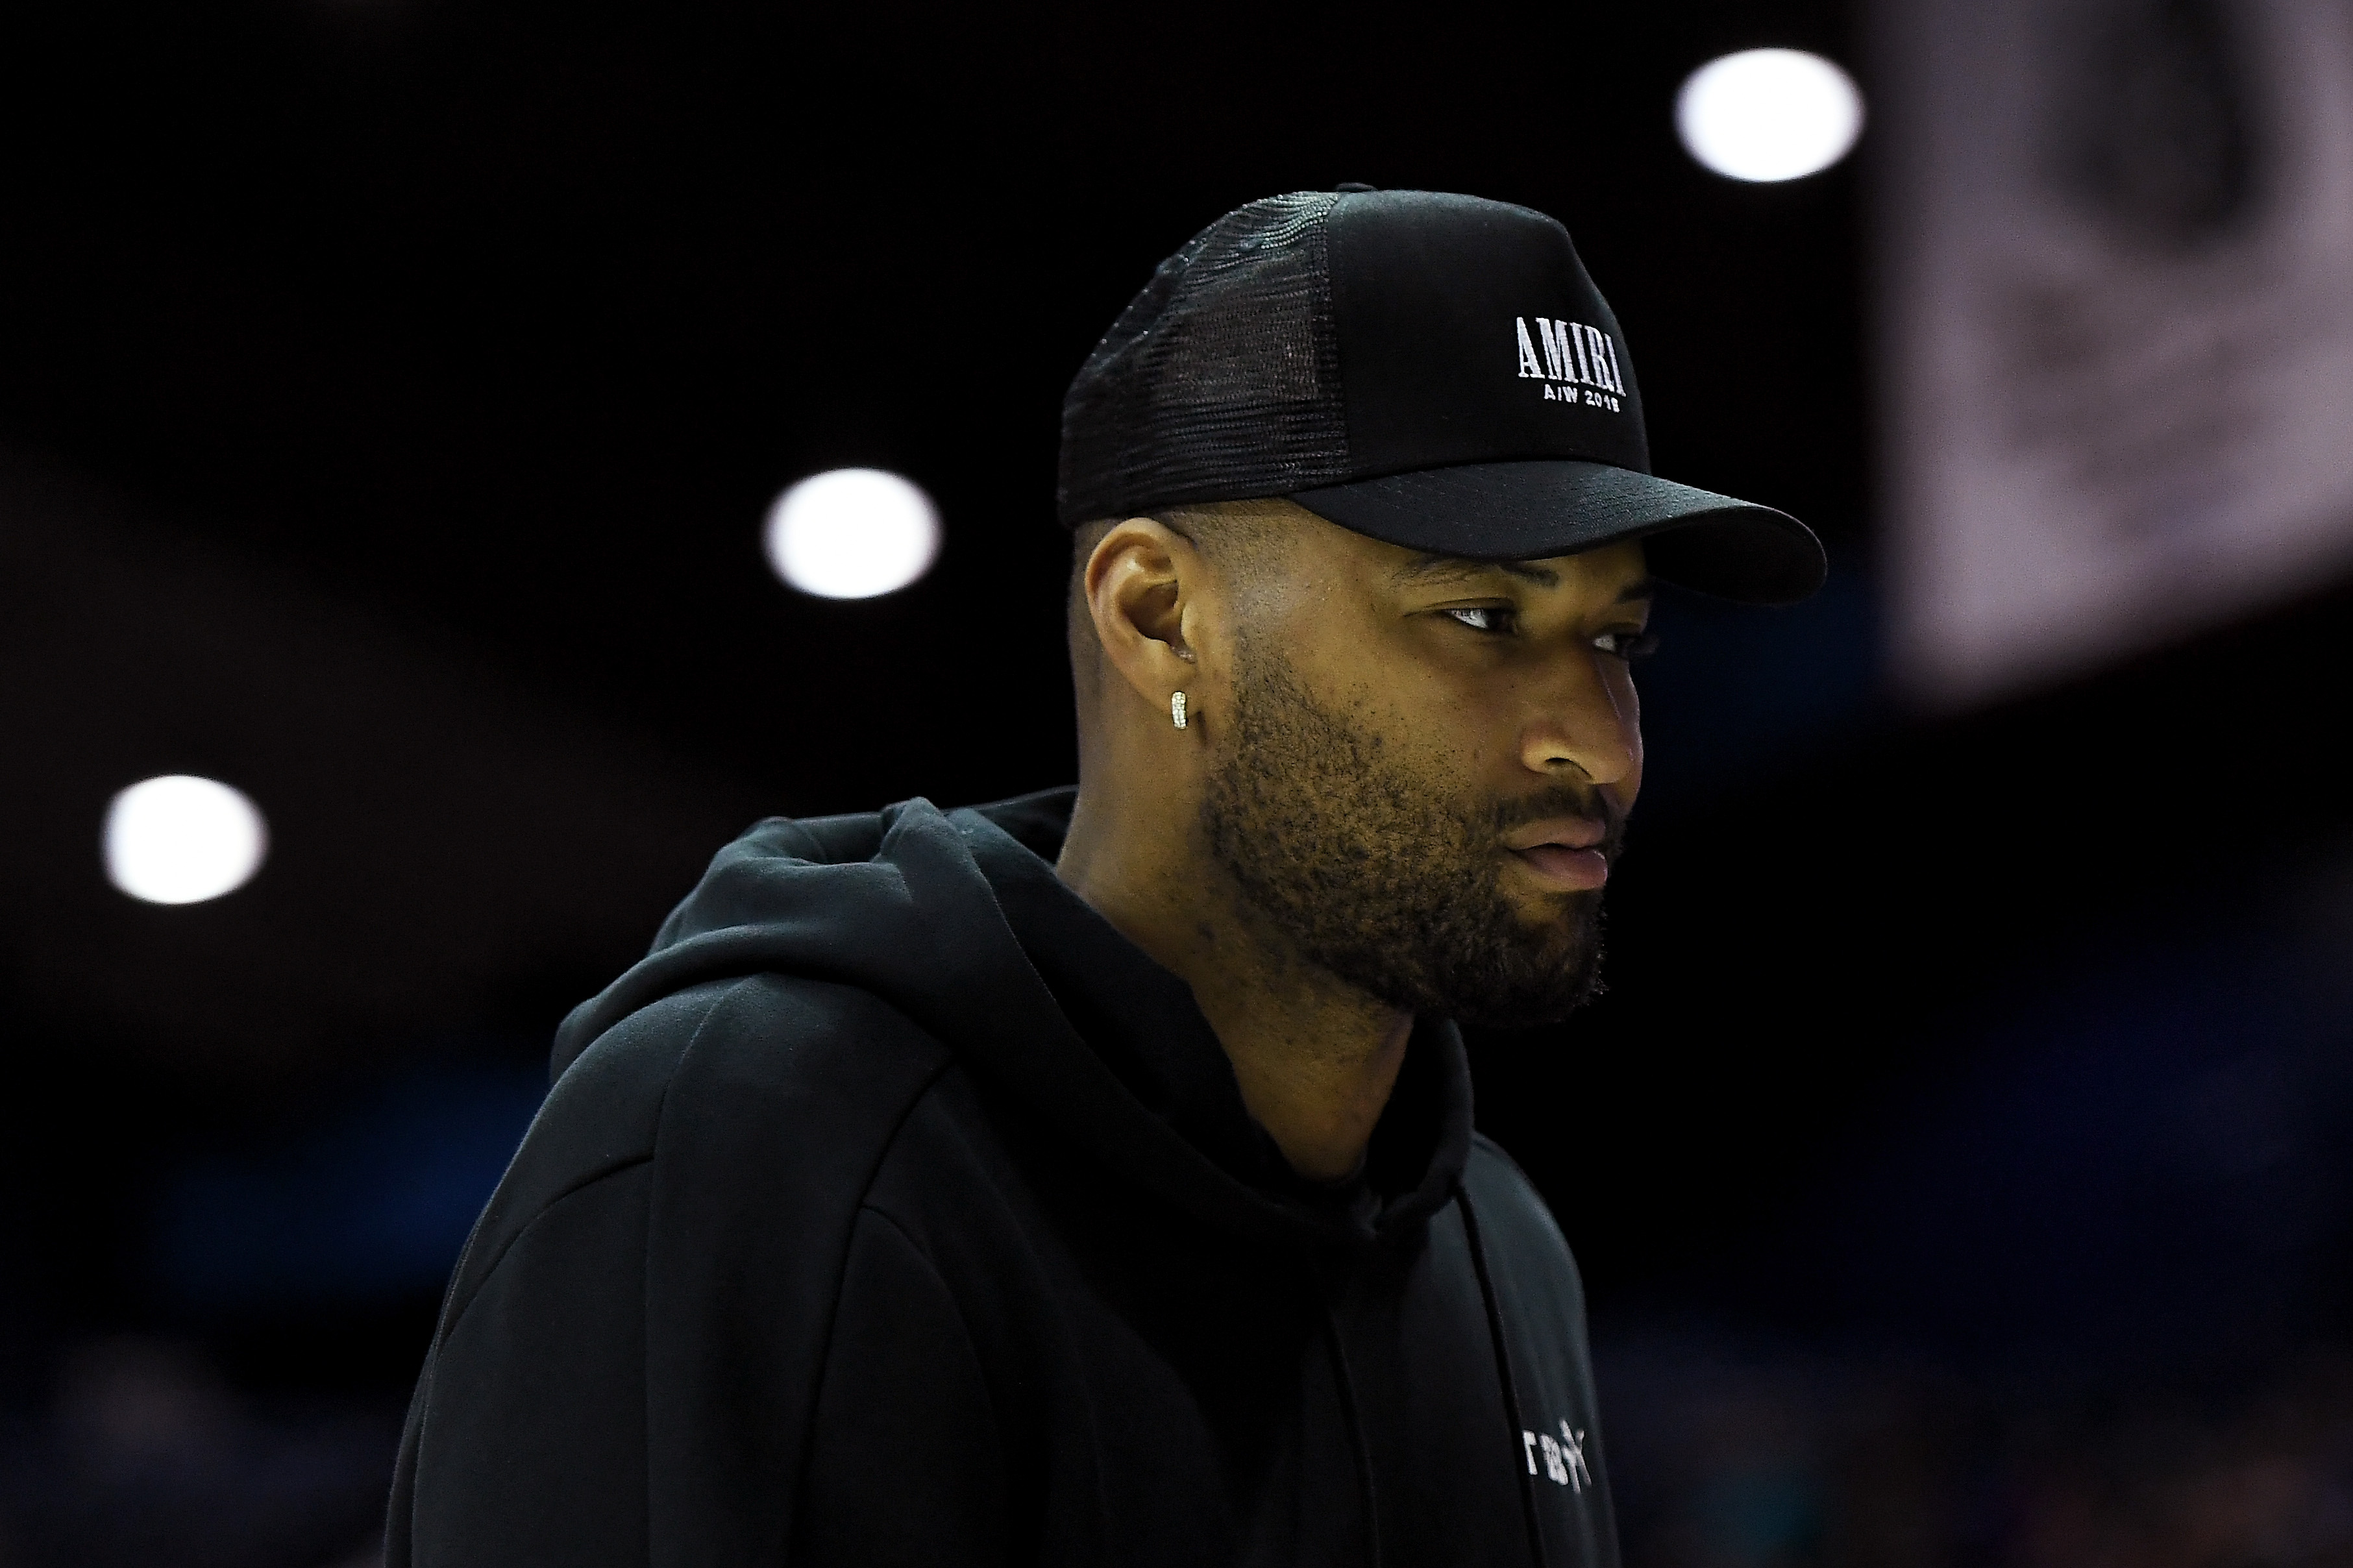 Demarcus Cousins Allegedly Threatened To Kill His Baby Momma In Leaked